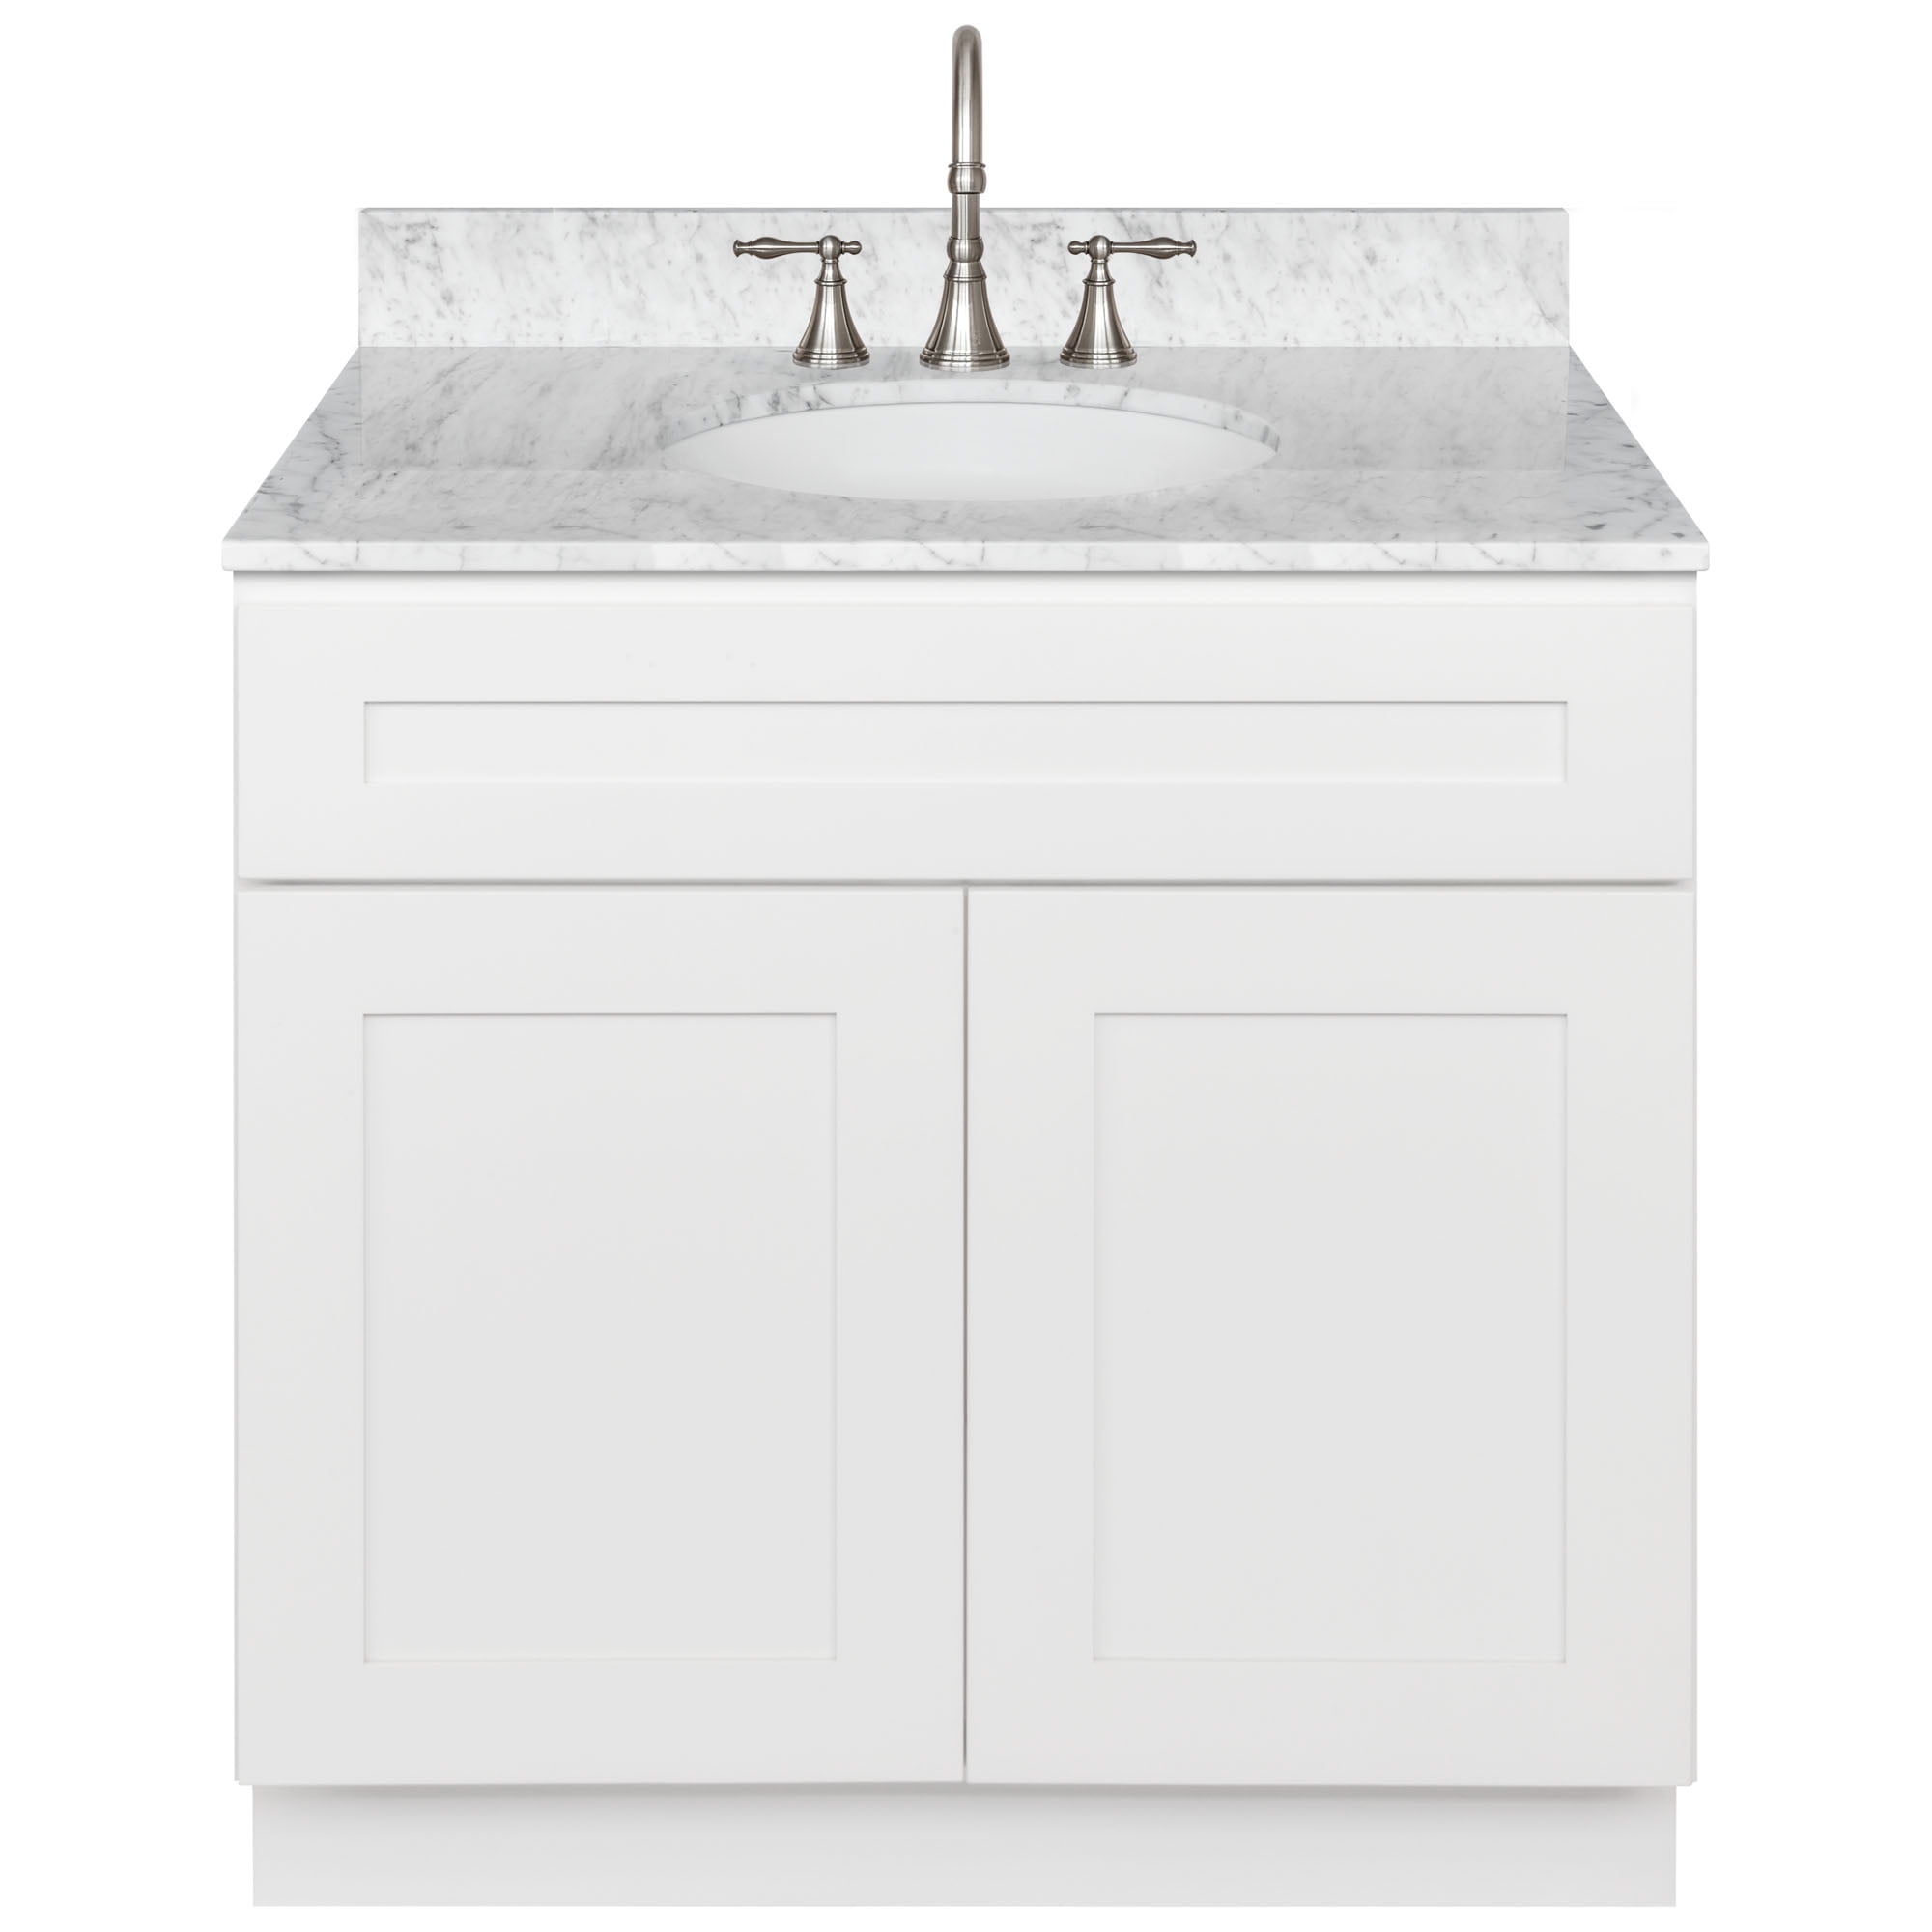 37" Vanity top with sink 4" spread Marble Cara White by Lesscare PICK-UP ONLY 